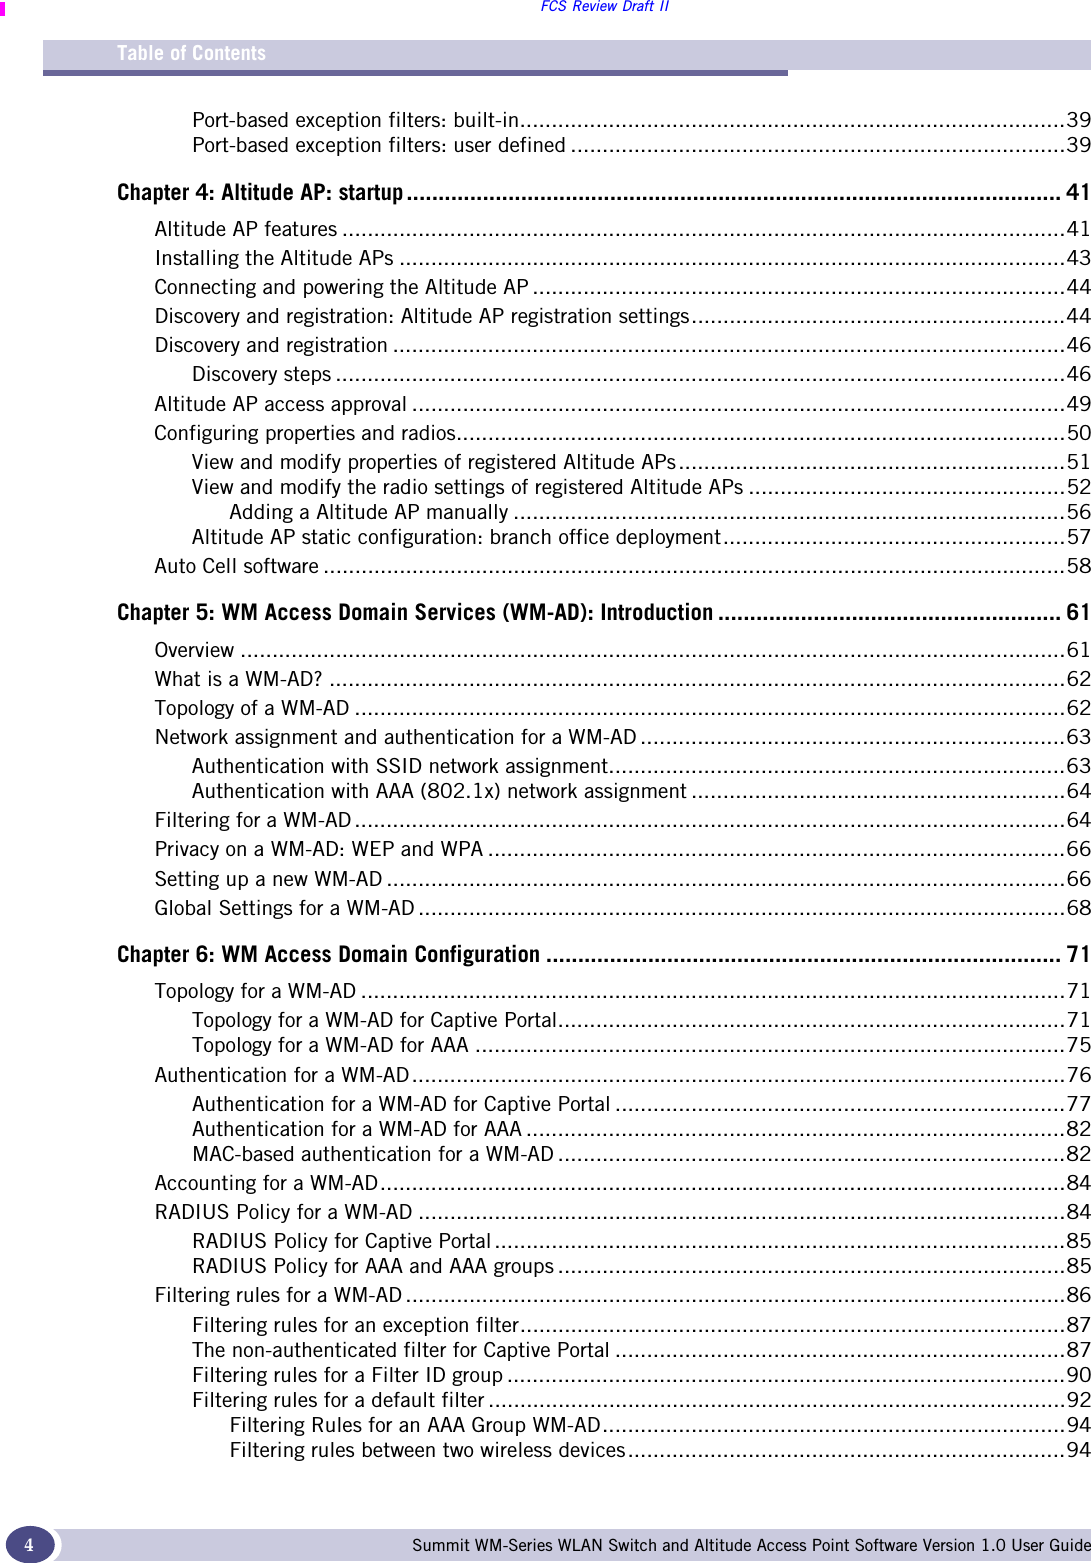 FCS Review Draft IITable of ContentsSummit WM-Series WLAN Switch and Altitude Access Point Software Version 1.0 User Guide4Port-based exception filters: built-in......................................................................................39Port-based exception filters: user defined ..............................................................................39Chapter 4: Altitude AP: startup ....................................................................................................... 41Altitude AP features ..................................................................................................................41Installing the Altitude APs .........................................................................................................43Connecting and powering the Altitude AP ....................................................................................44Discovery and registration: Altitude AP registration settings...........................................................44Discovery and registration ..........................................................................................................46Discovery steps ...................................................................................................................46Altitude AP access approval .......................................................................................................49Configuring properties and radios................................................................................................50View and modify properties of registered Altitude APs.............................................................51View and modify the radio settings of registered Altitude APs ..................................................52Adding a Altitude AP manually .......................................................................................56Altitude AP static configuration: branch office deployment......................................................57Auto Cell software .....................................................................................................................58Chapter 5: WM Access Domain Services (WM-AD): Introduction ...................................................... 61Overview ..................................................................................................................................61What is a WM-AD? ....................................................................................................................62Topology of a WM-AD ................................................................................................................62Network assignment and authentication for a WM-AD ...................................................................63Authentication with SSID network assignment........................................................................63Authentication with AAA (802.1x) network assignment ...........................................................64Filtering for a WM-AD ................................................................................................................64Privacy on a WM-AD: WEP and WPA ...........................................................................................66Setting up a new WM-AD ...........................................................................................................66Global Settings for a WM-AD ......................................................................................................68Chapter 6: WM Access Domain Configuration ................................................................................. 71Topology for a WM-AD ...............................................................................................................71Topology for a WM-AD for Captive Portal................................................................................71Topology for a WM-AD for AAA .............................................................................................75Authentication for a WM-AD.......................................................................................................76Authentication for a WM-AD for Captive Portal .......................................................................77Authentication for a WM-AD for AAA .....................................................................................82MAC-based authentication for a WM-AD ................................................................................82Accounting for a WM-AD............................................................................................................84RADIUS Policy for a WM-AD ......................................................................................................84RADIUS Policy for Captive Portal ..........................................................................................85RADIUS Policy for AAA and AAA groups ................................................................................85Filtering rules for a WM-AD ........................................................................................................86Filtering rules for an exception filter......................................................................................87The non-authenticated filter for Captive Portal .......................................................................87Filtering rules for a Filter ID group ........................................................................................90Filtering rules for a default filter ...........................................................................................92Filtering Rules for an AAA Group WM-AD.........................................................................94Filtering rules between two wireless devices.....................................................................94